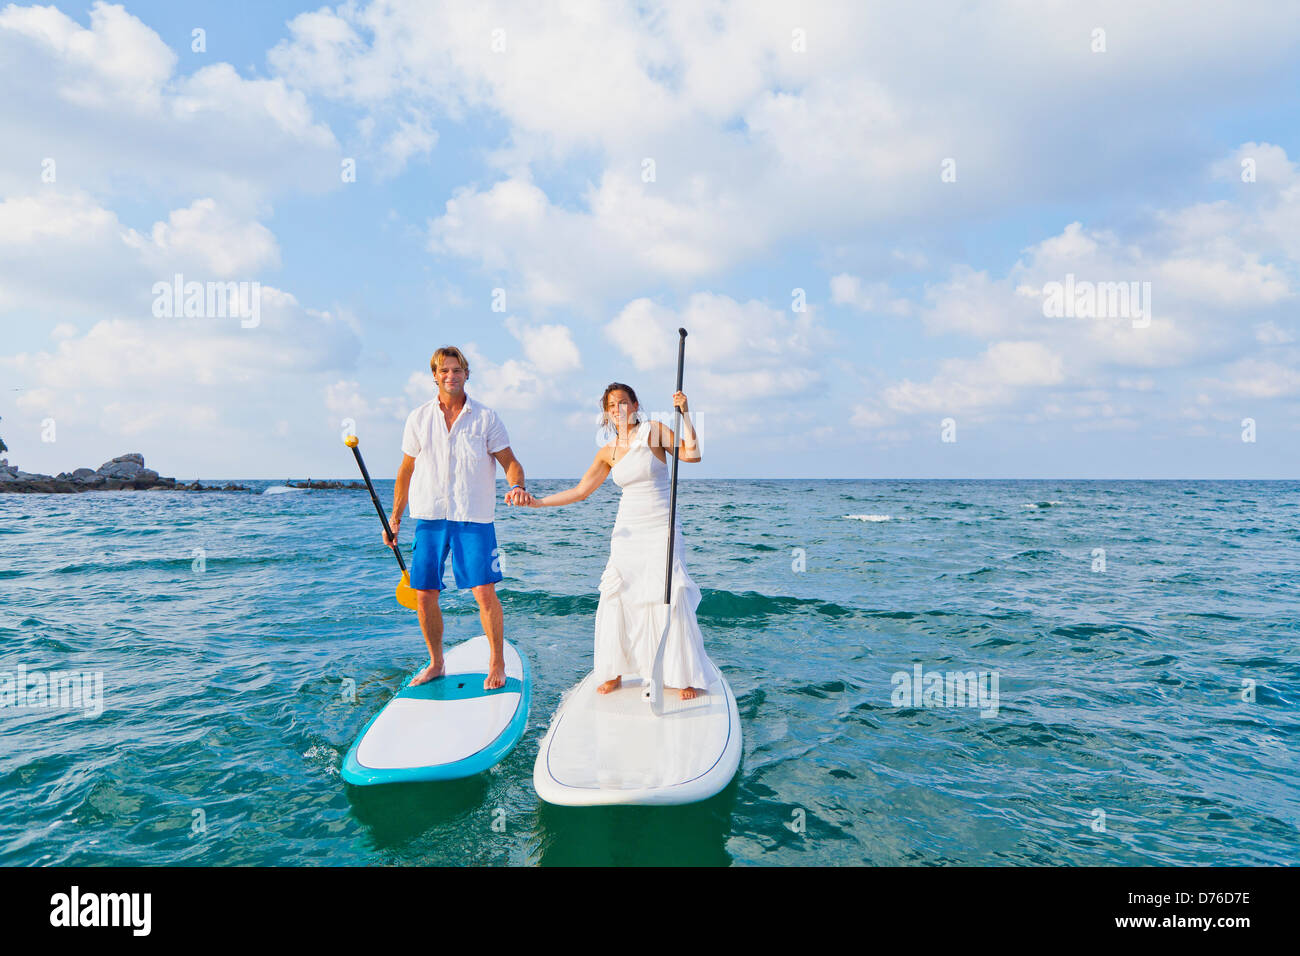 Habillé man and woman riding paddle boards Banque D'Images